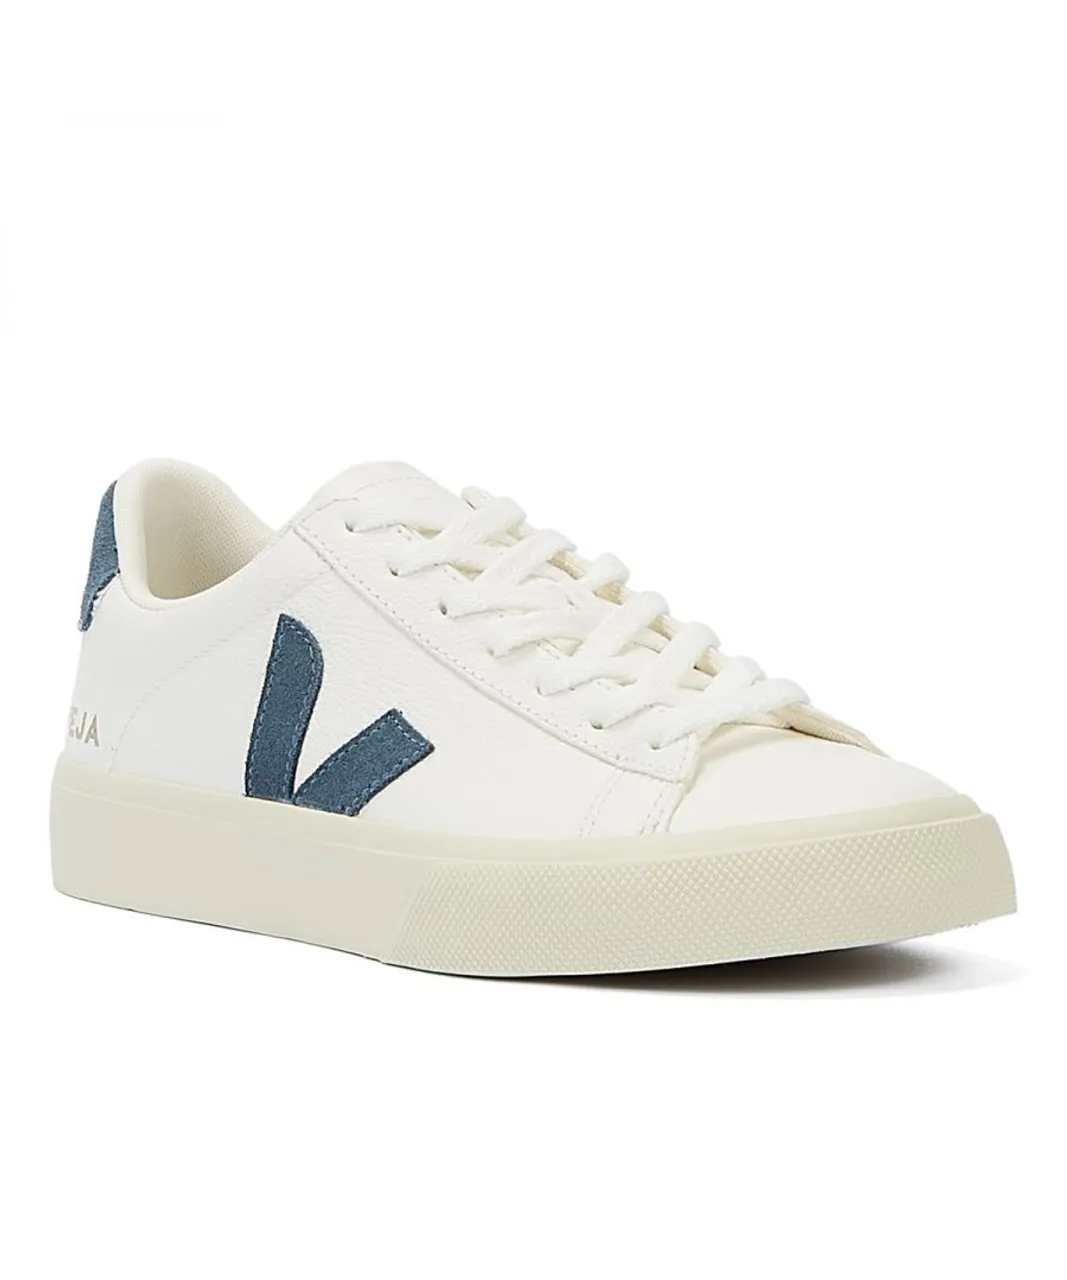 Veja Campo California Mens White/Blue Trainers Leather